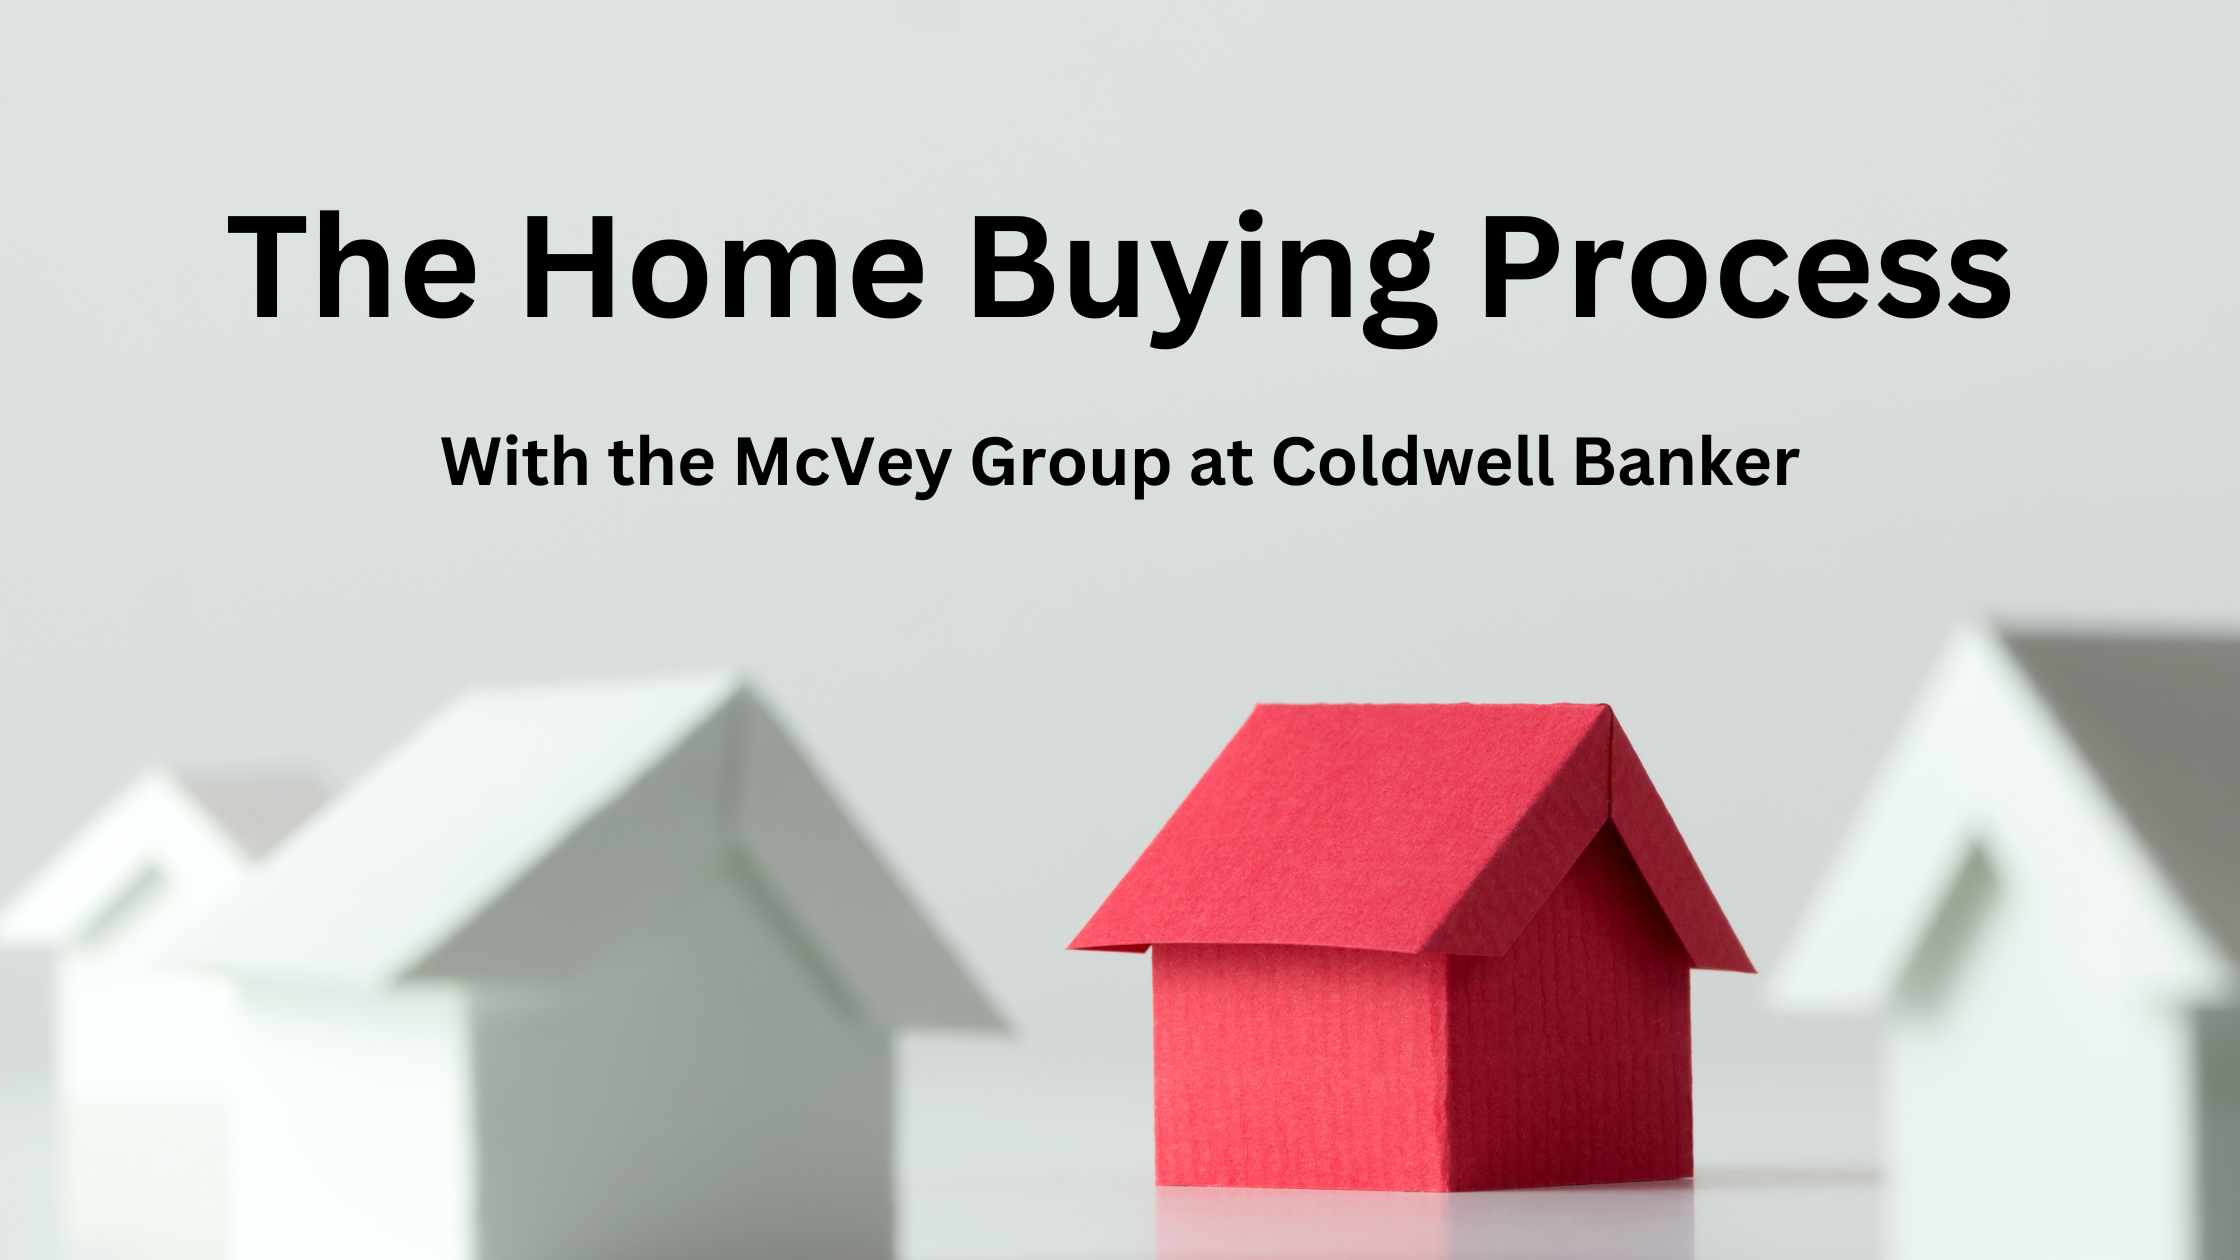 The Home Buying Process with the McVey Group at Coldwell Banker